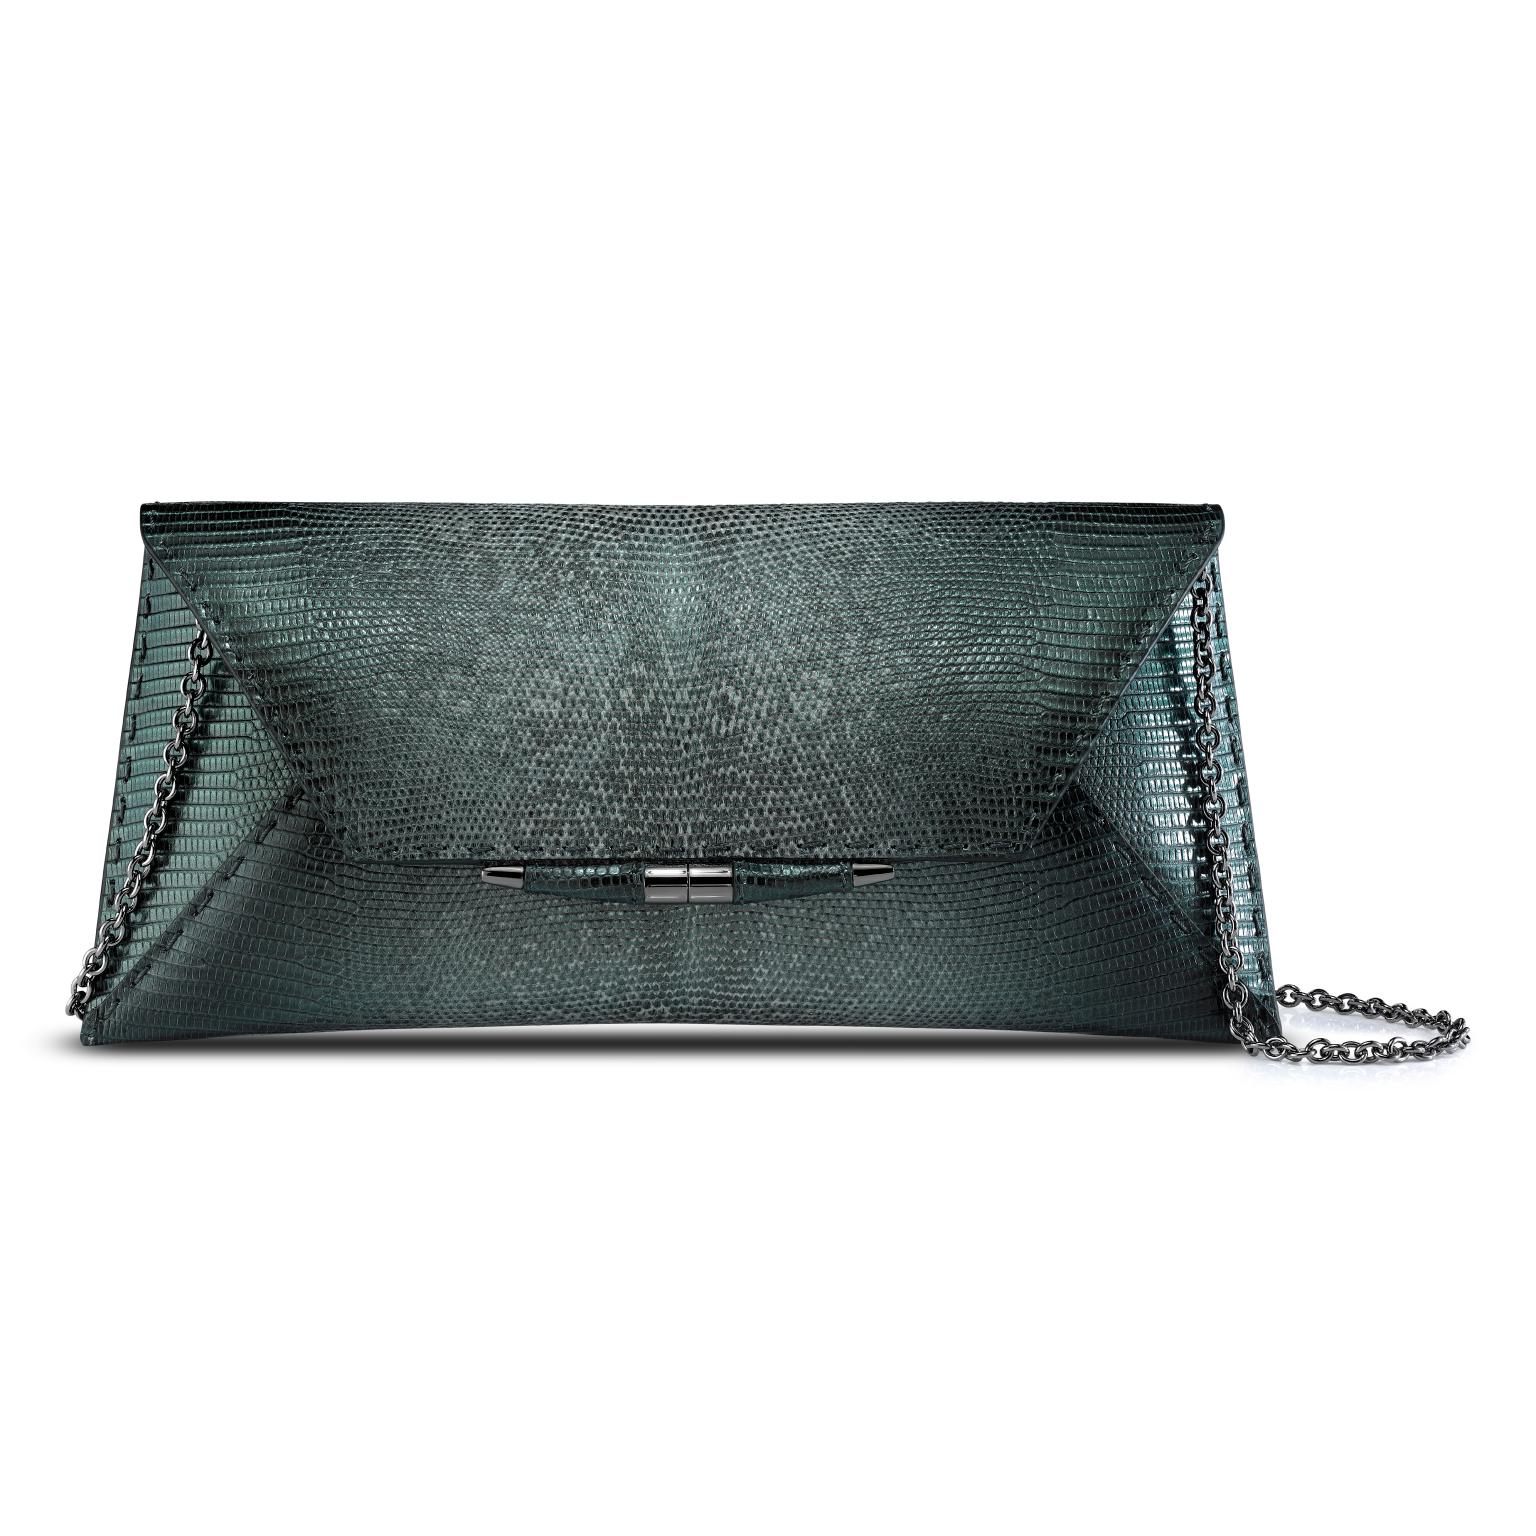 The Aimee Clutch large is featured in our Peacock Lizard with gunmetal hardware. The clutch is designed with a three-quarter front flap, a magnetic snap closure and is finished with our custom Infinity Bar. It fits the large iPhone, has a hidden